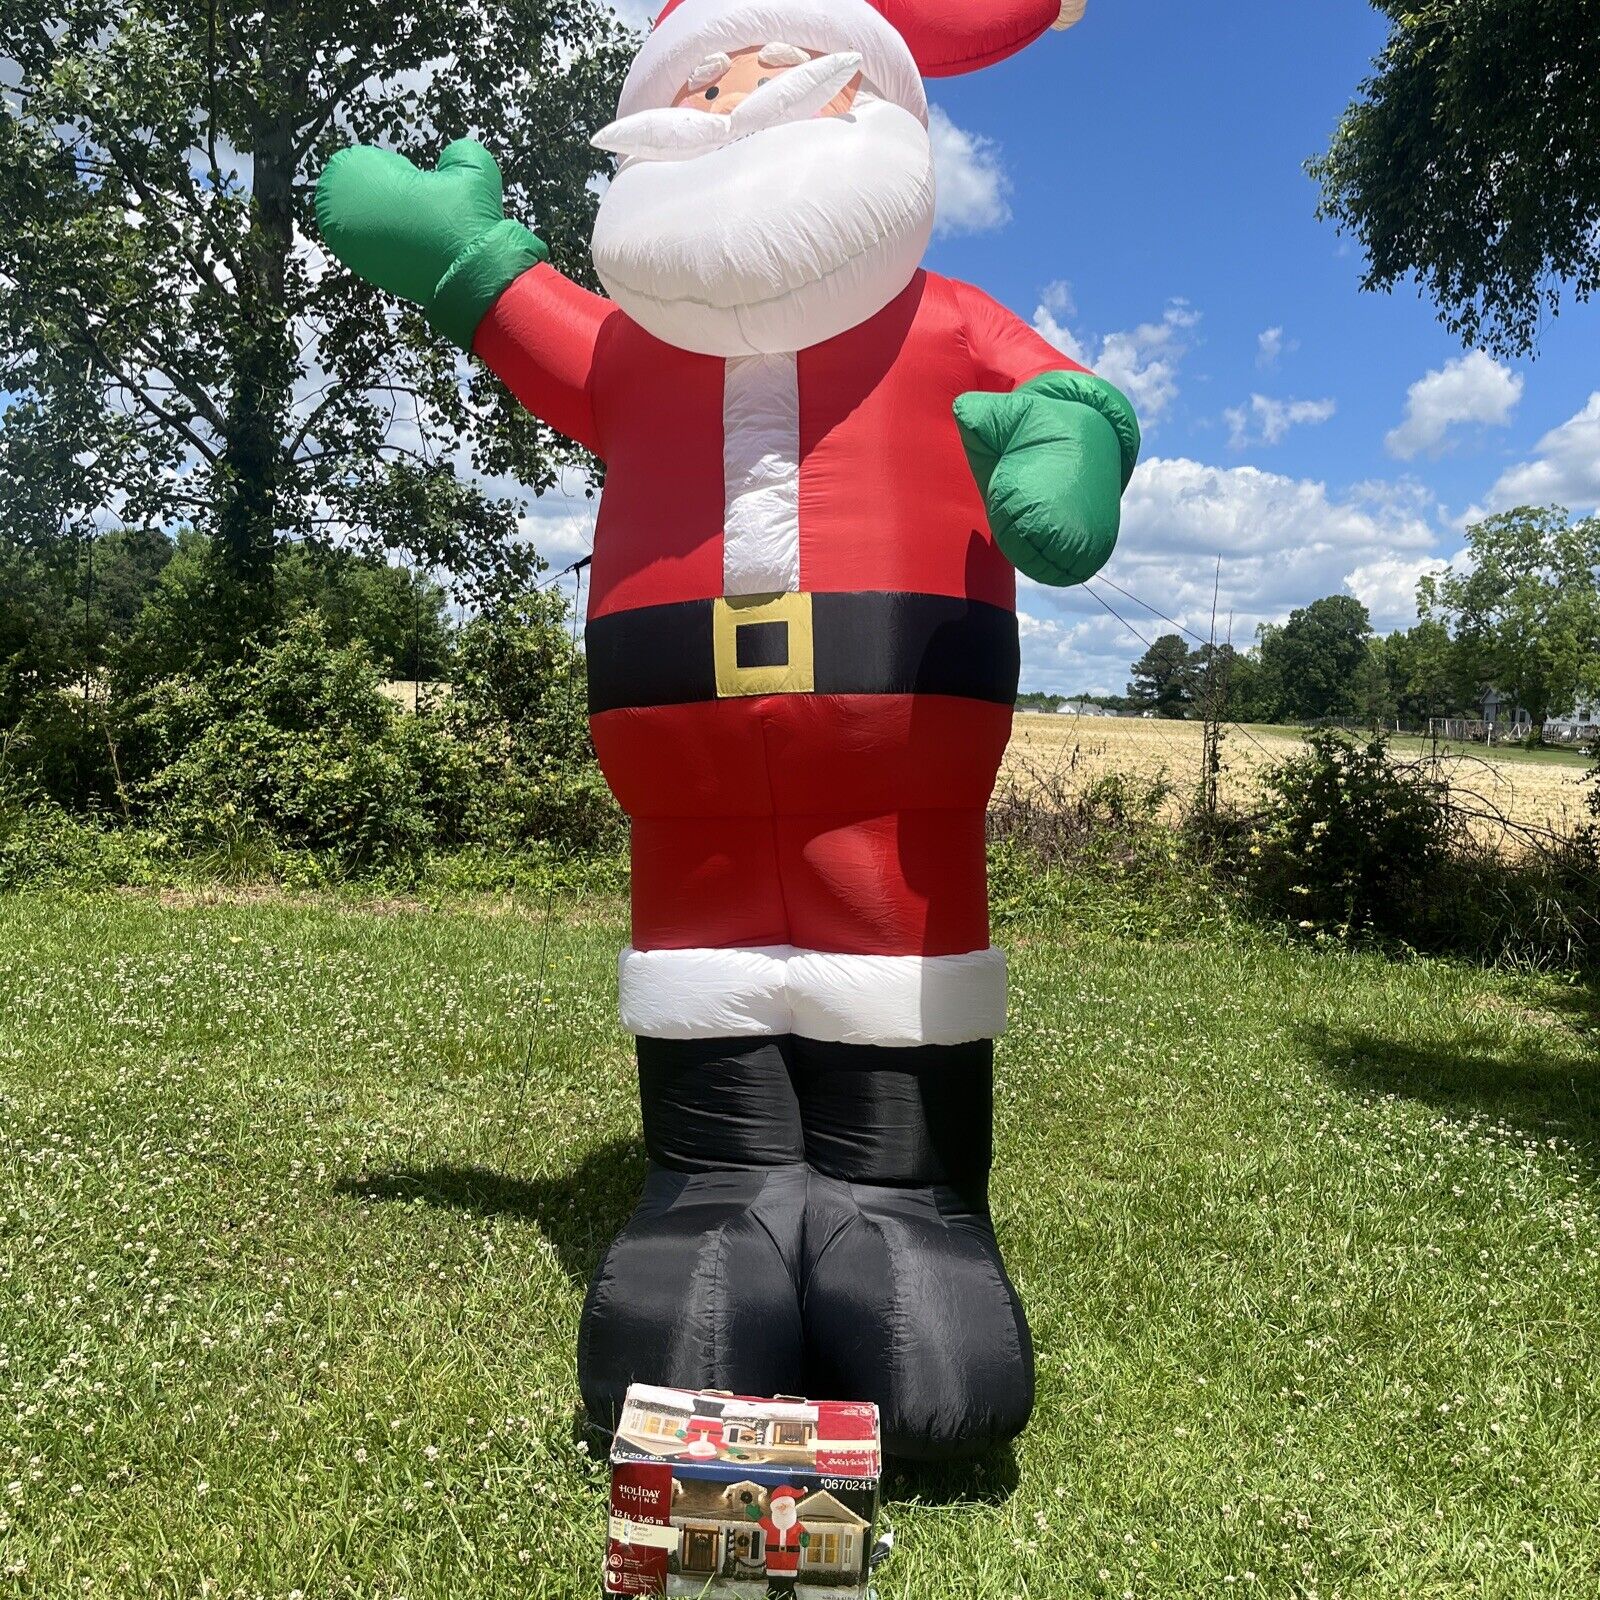 Holiday Living 12 Foot Tall Inflatable Airblown Gemmy Santa Claus